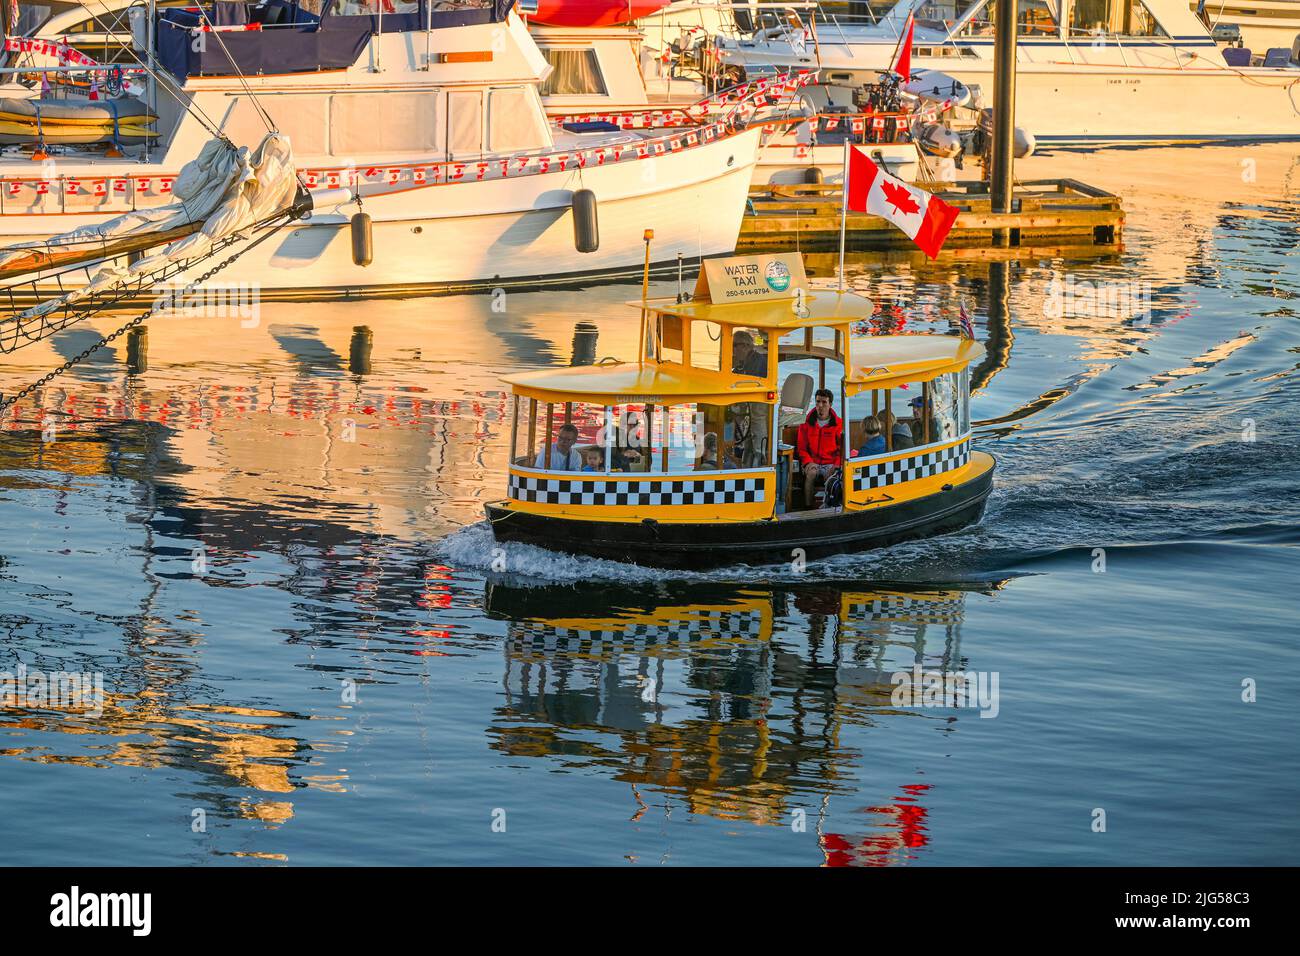 Water taxi, passenger ferry, Inner Harbour, Victoria, British Columbia, Canada Stock Photo